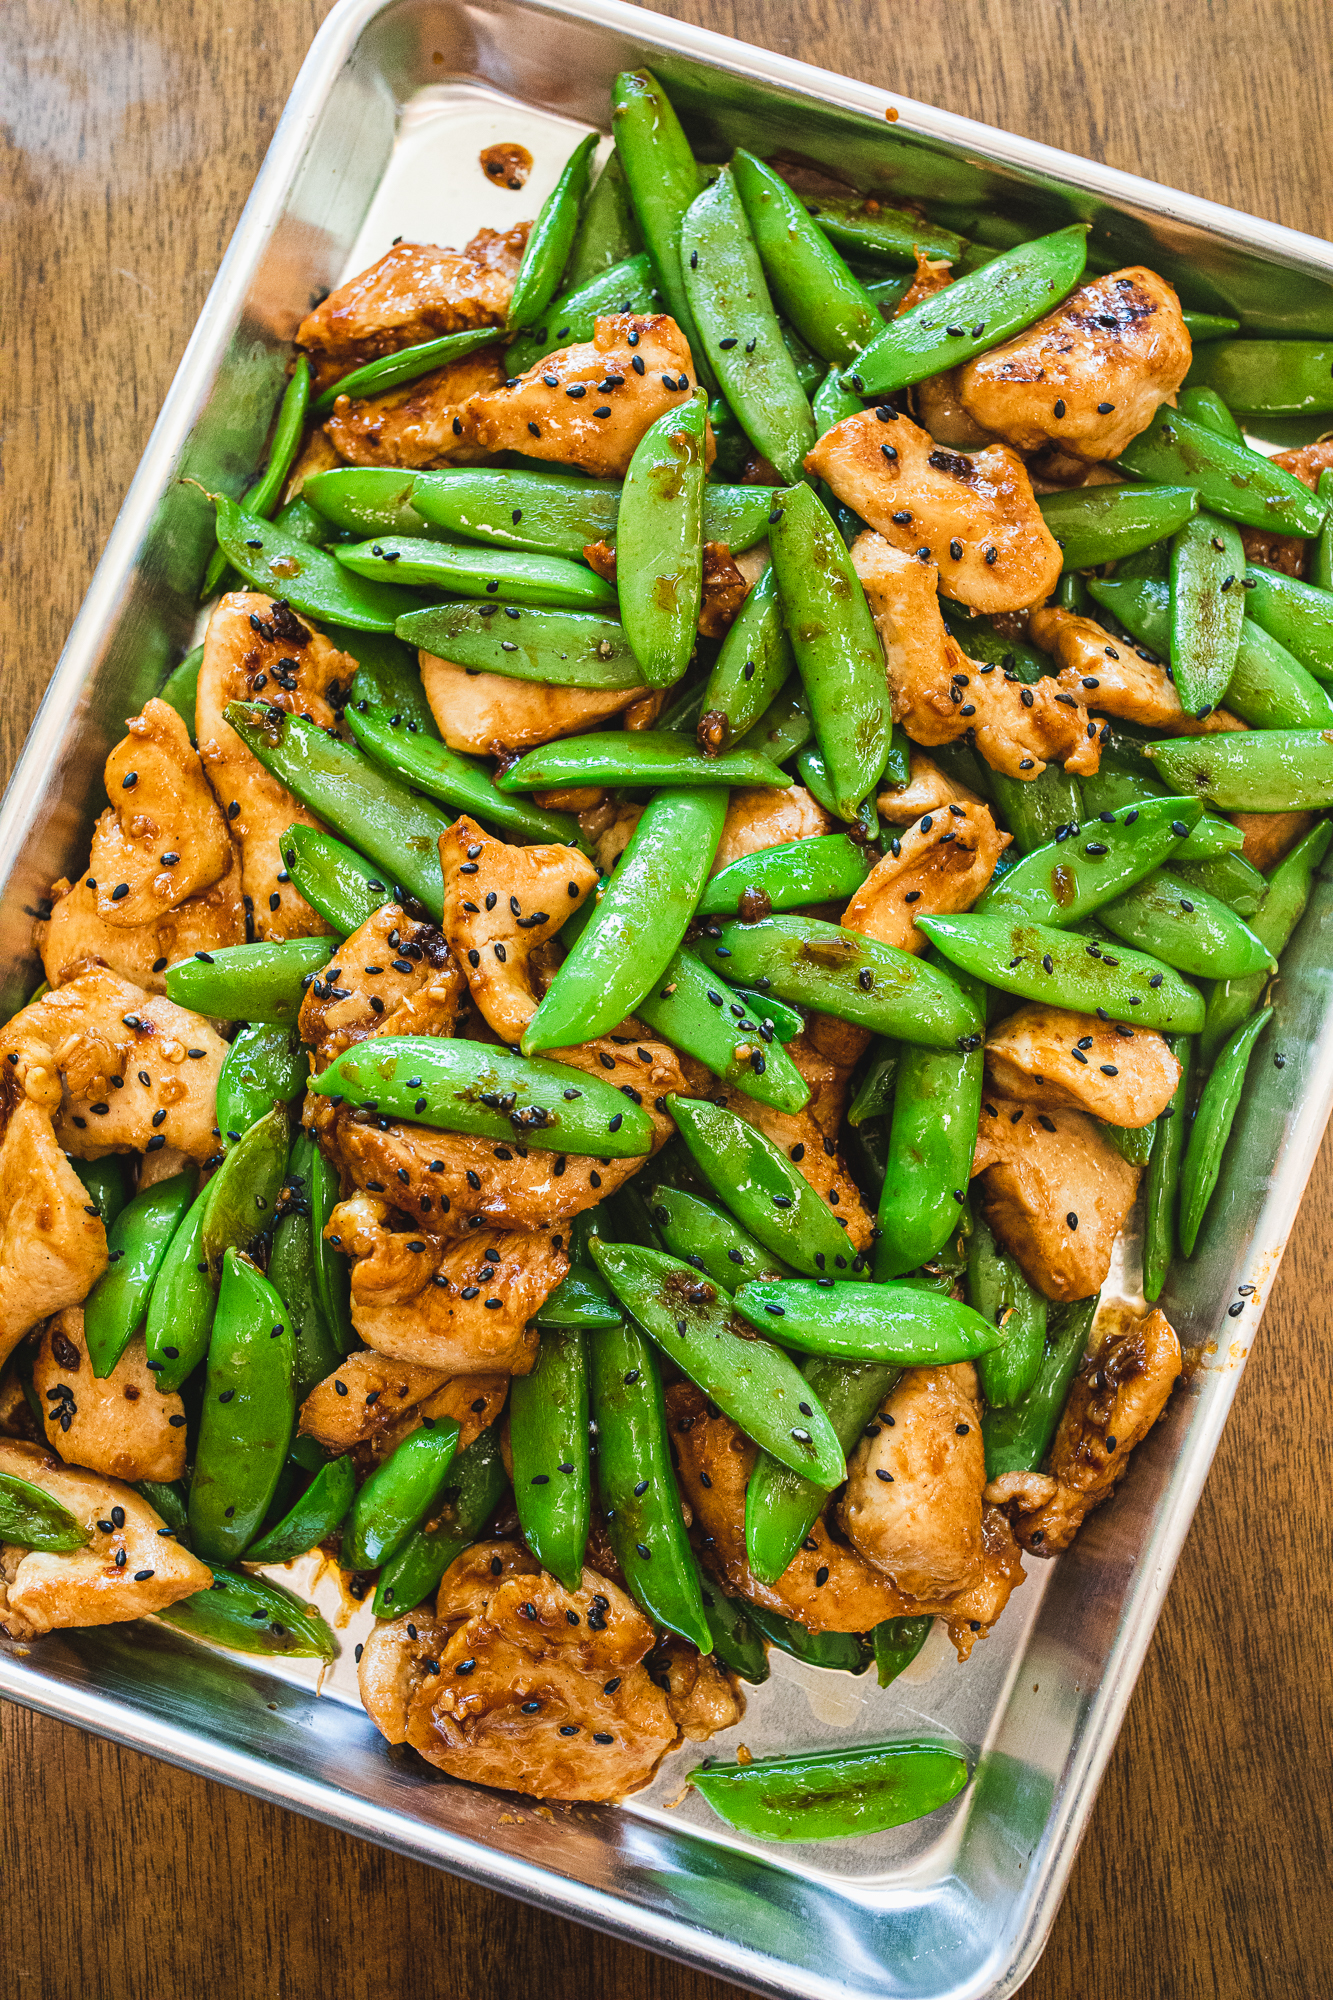 Best Snap Pea and Chicken Salad Recipe - How To Make Snap Pea and